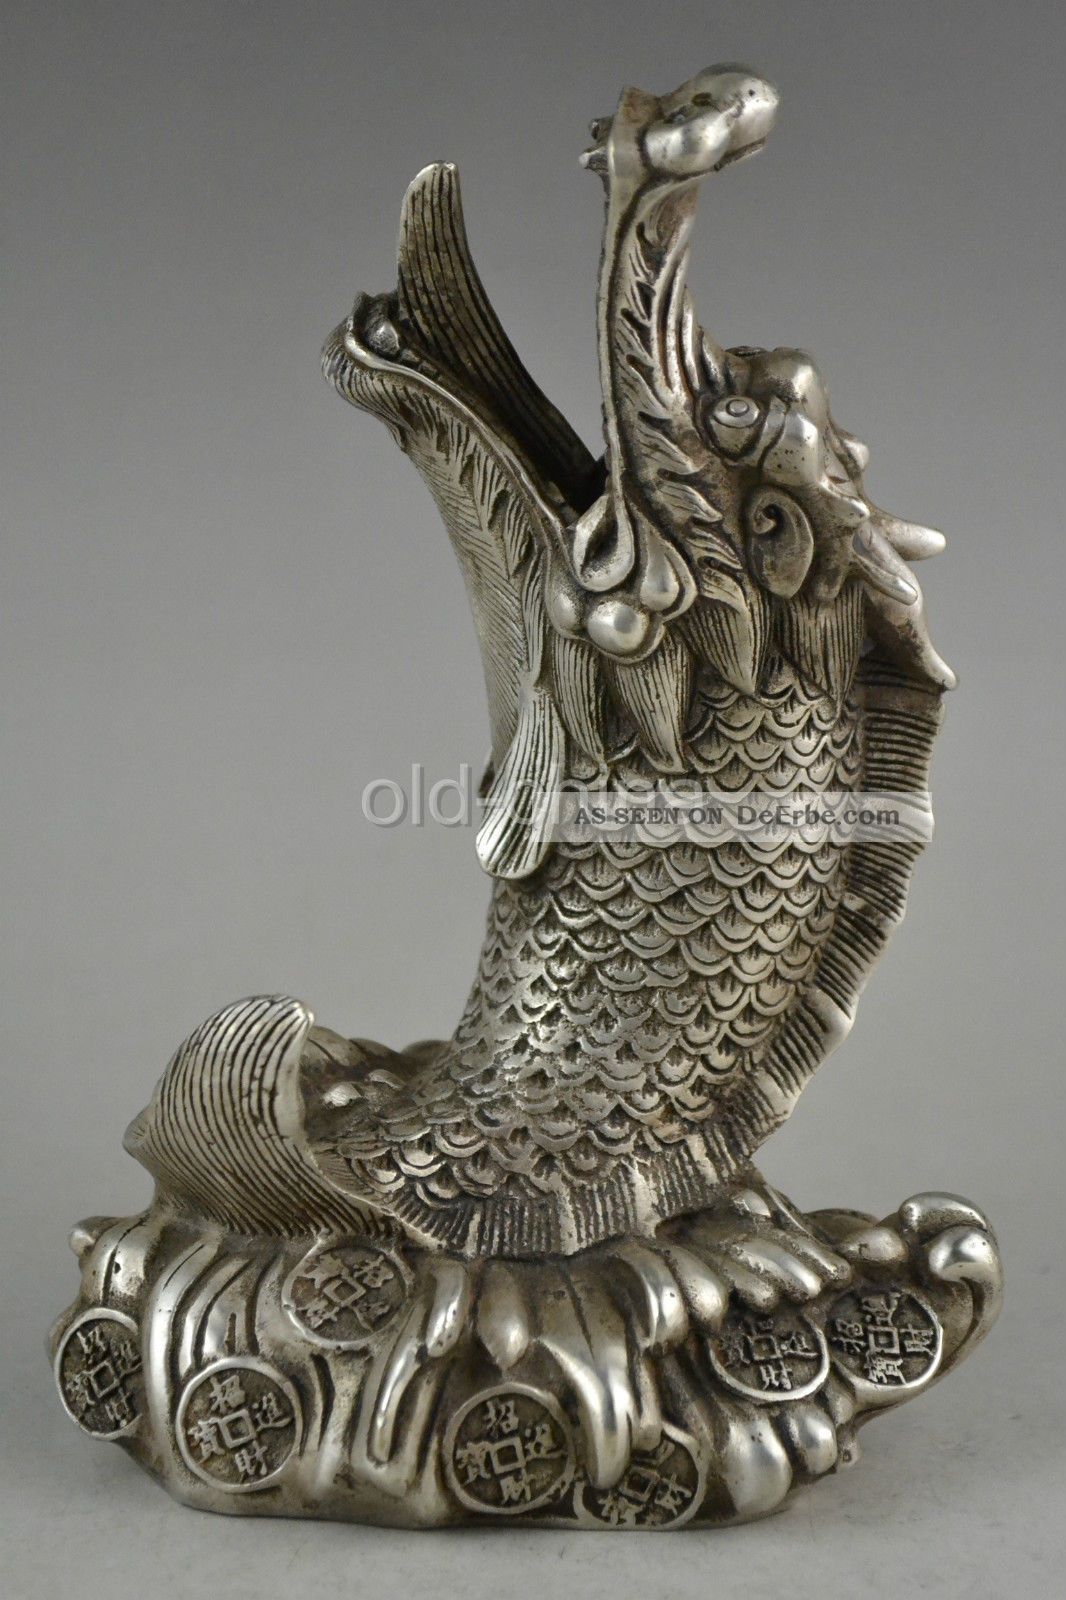 China Collectible Decorate Water God Old Tibet Silver Fish Dragon Jump Statue Volkskunst Bild